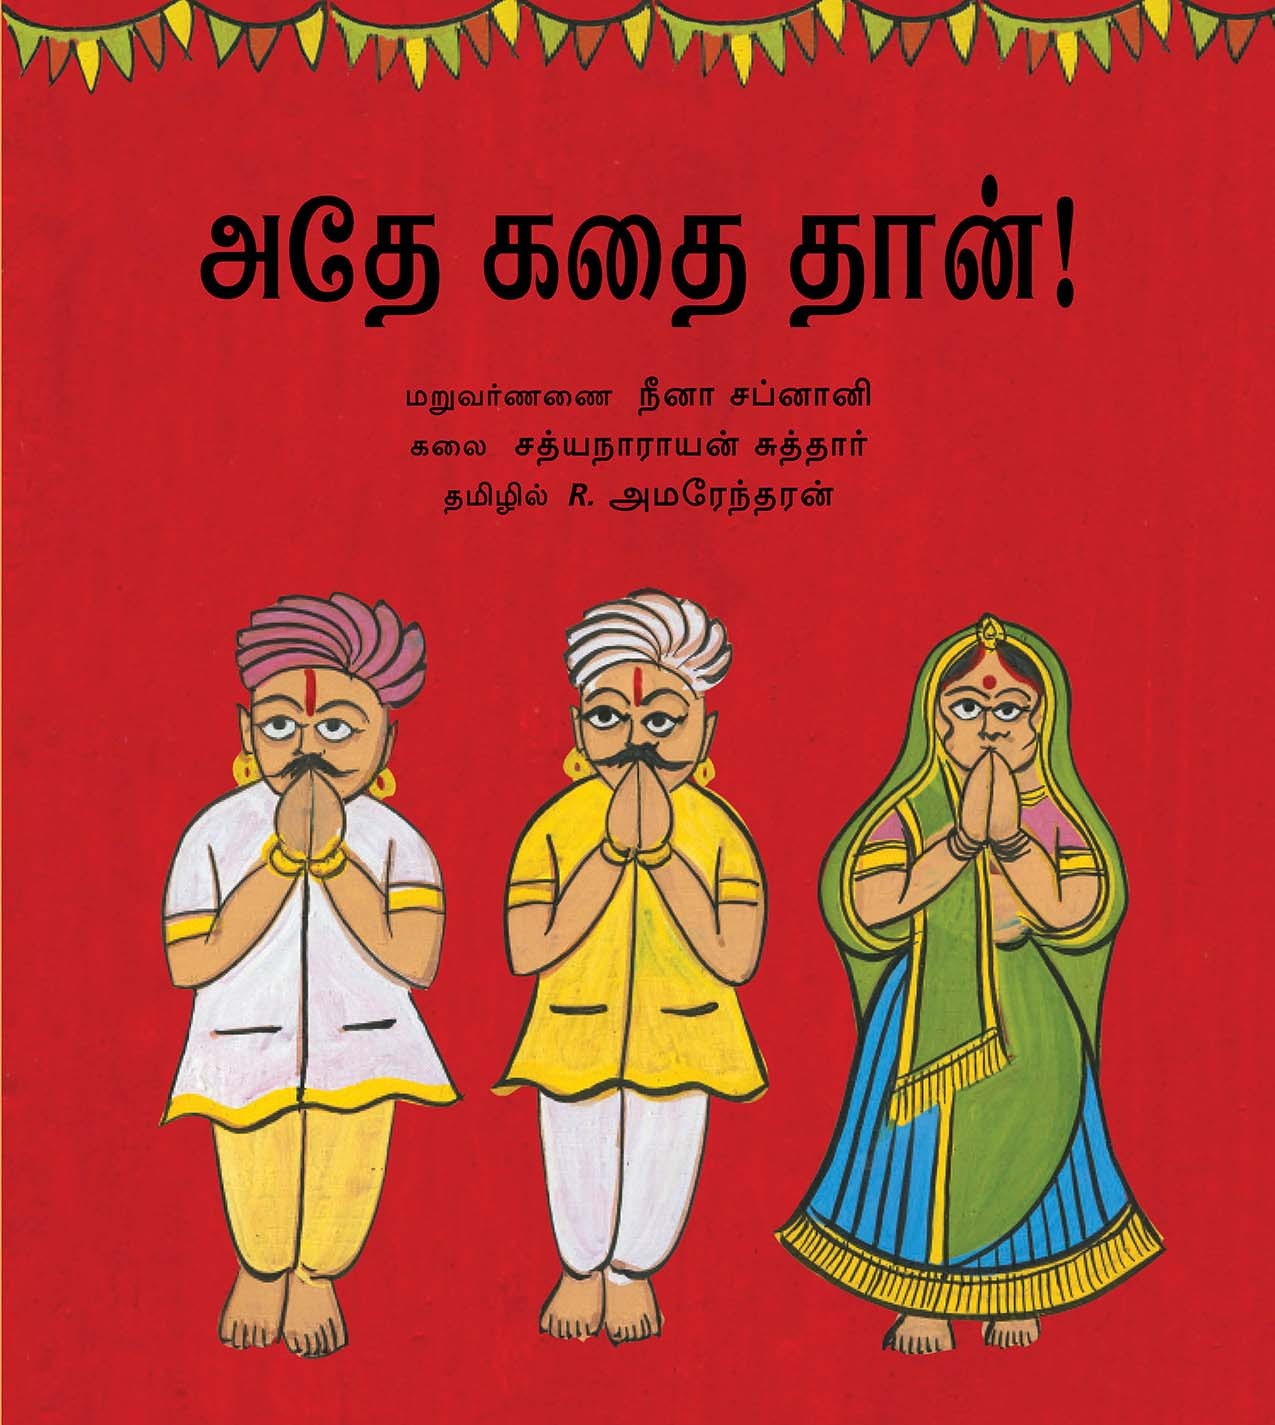 It's All The Same!/Athey Kathai Thaan (Tamil)